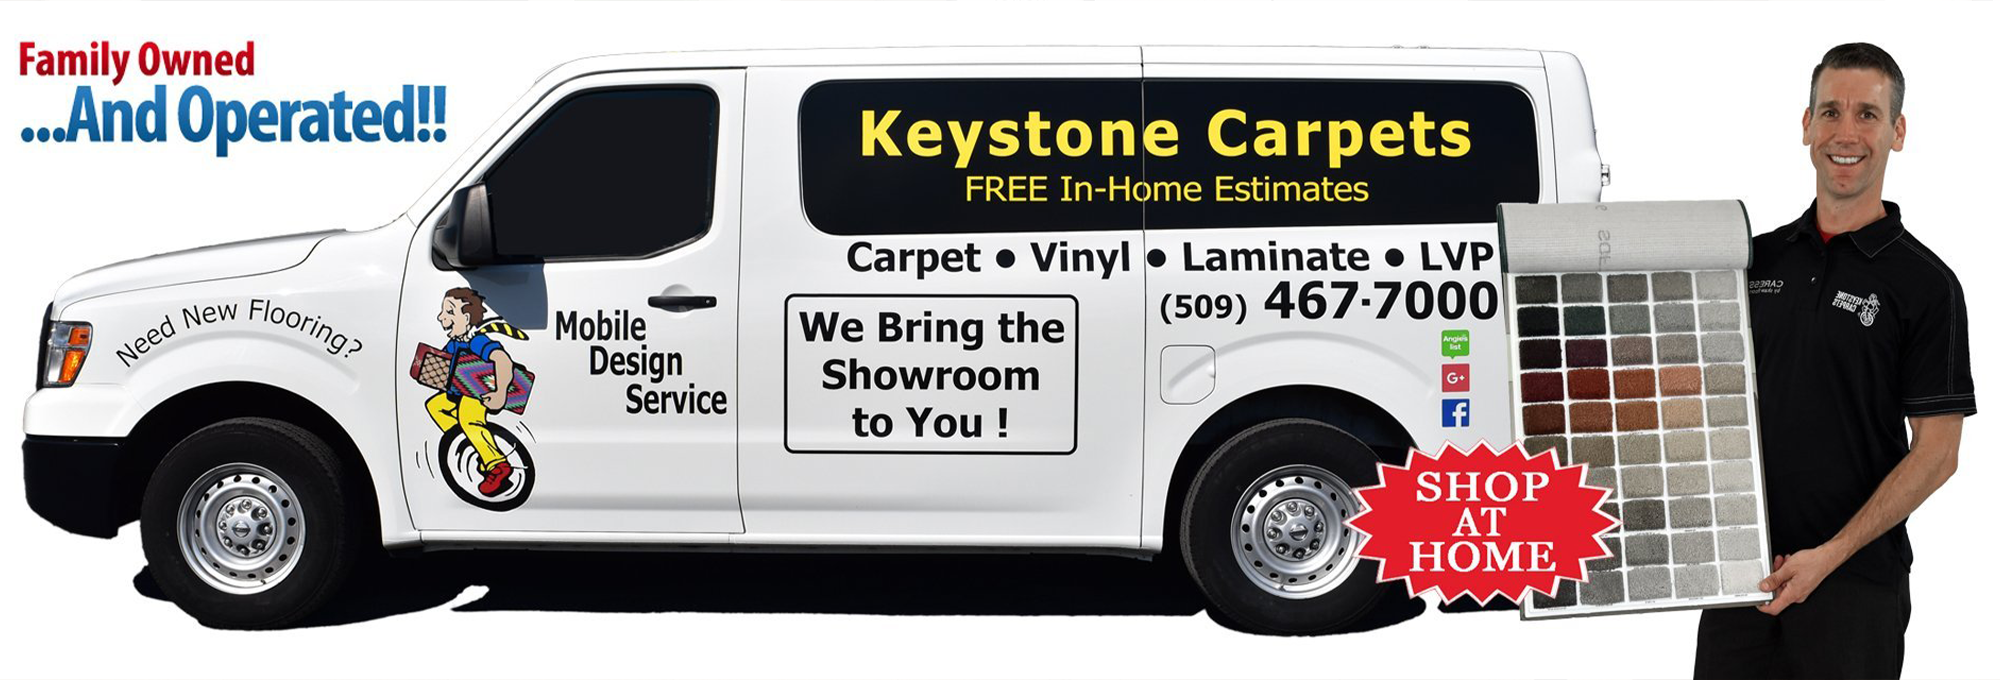 white commercial van from keystone carpets inc in WA